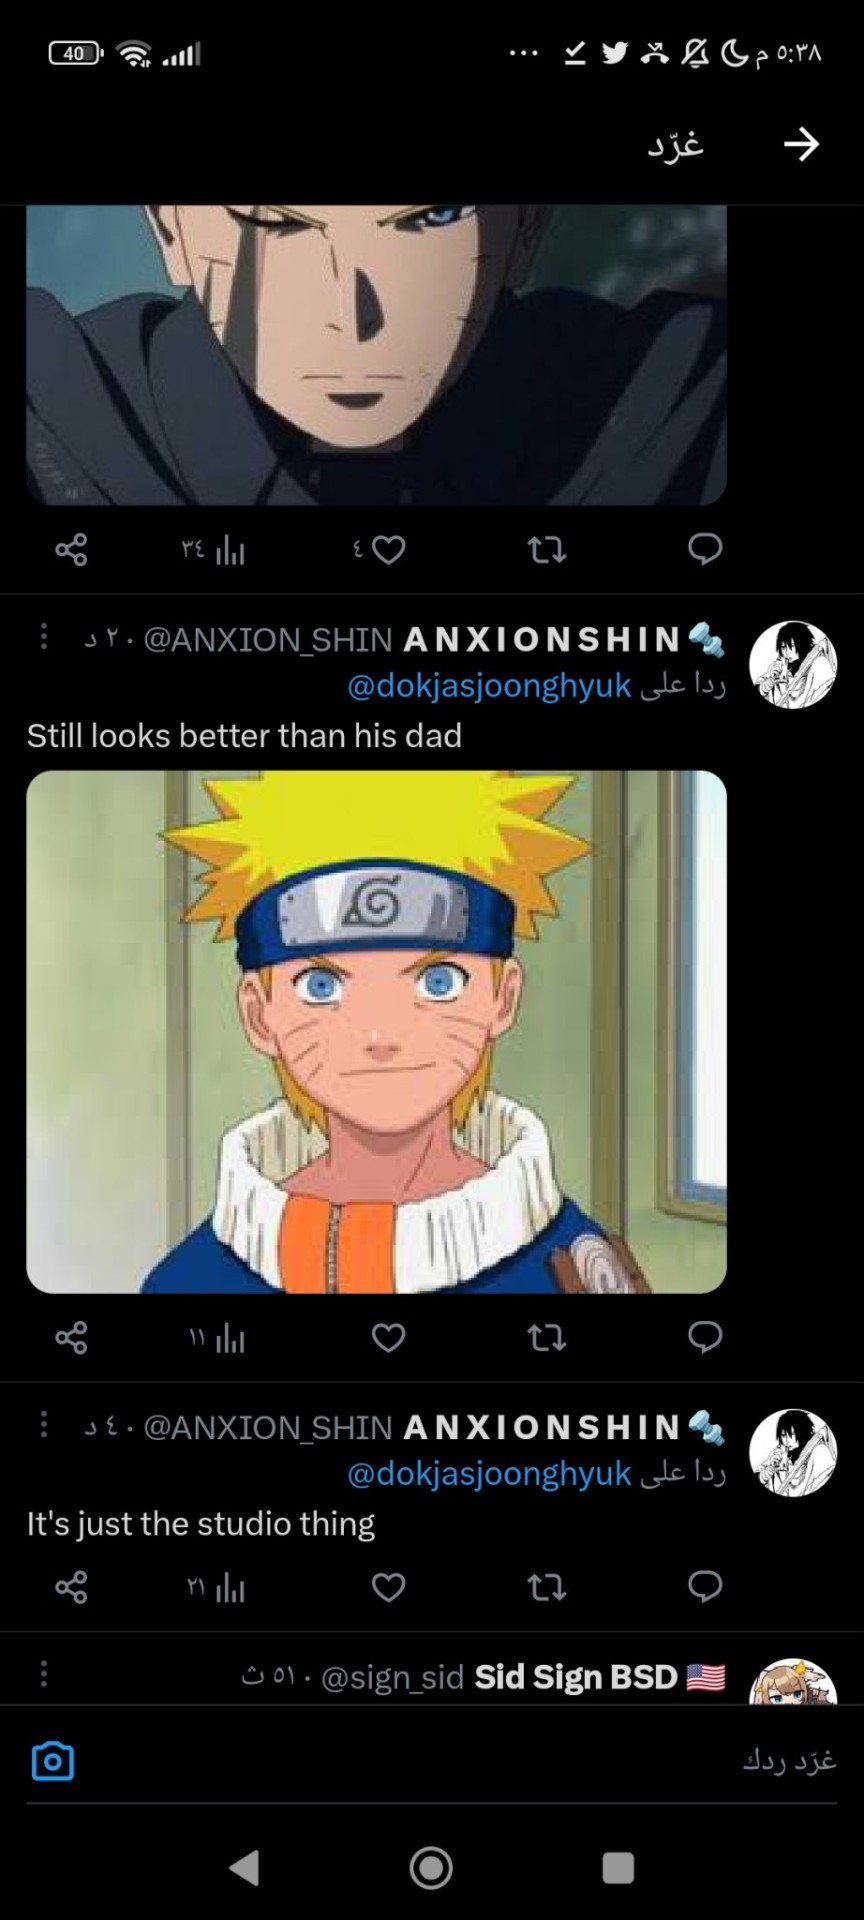 IS NARUTO DEAD!? Is this a fanart or is this canon?? : r/Boruto